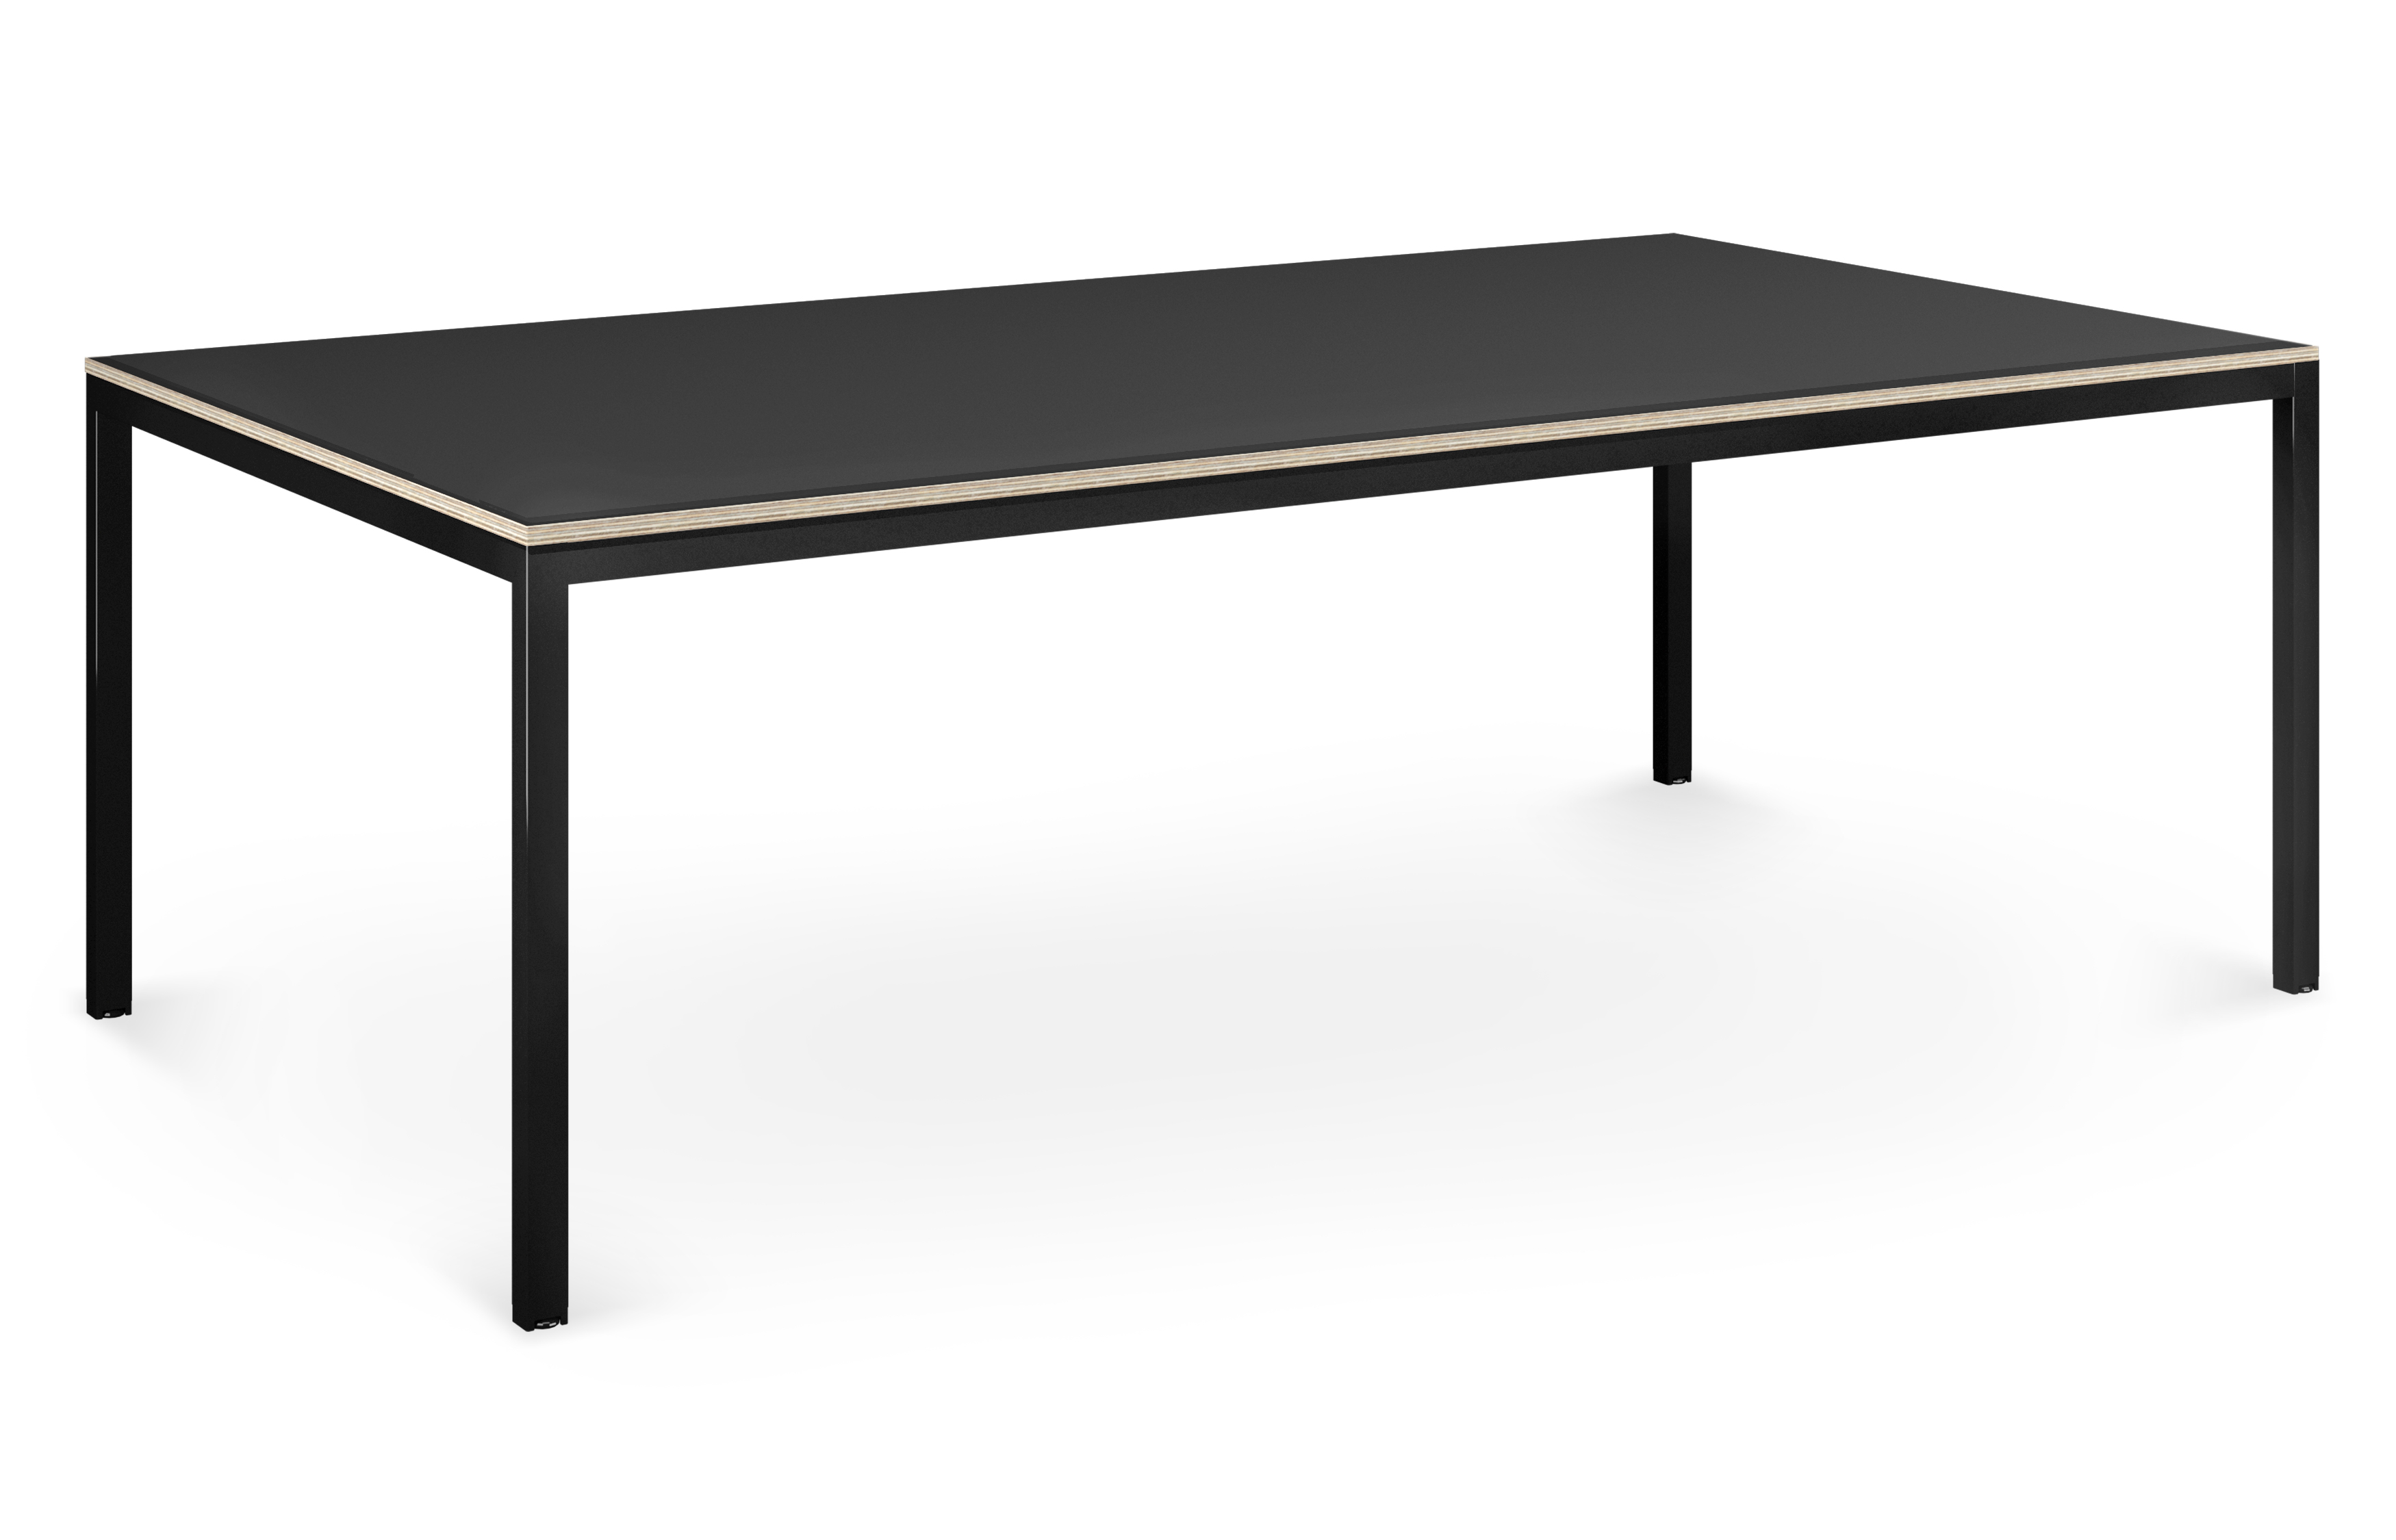 WS - Co.Stories desk - 1980 x 1380 - Black Frame, Black top with ply edge